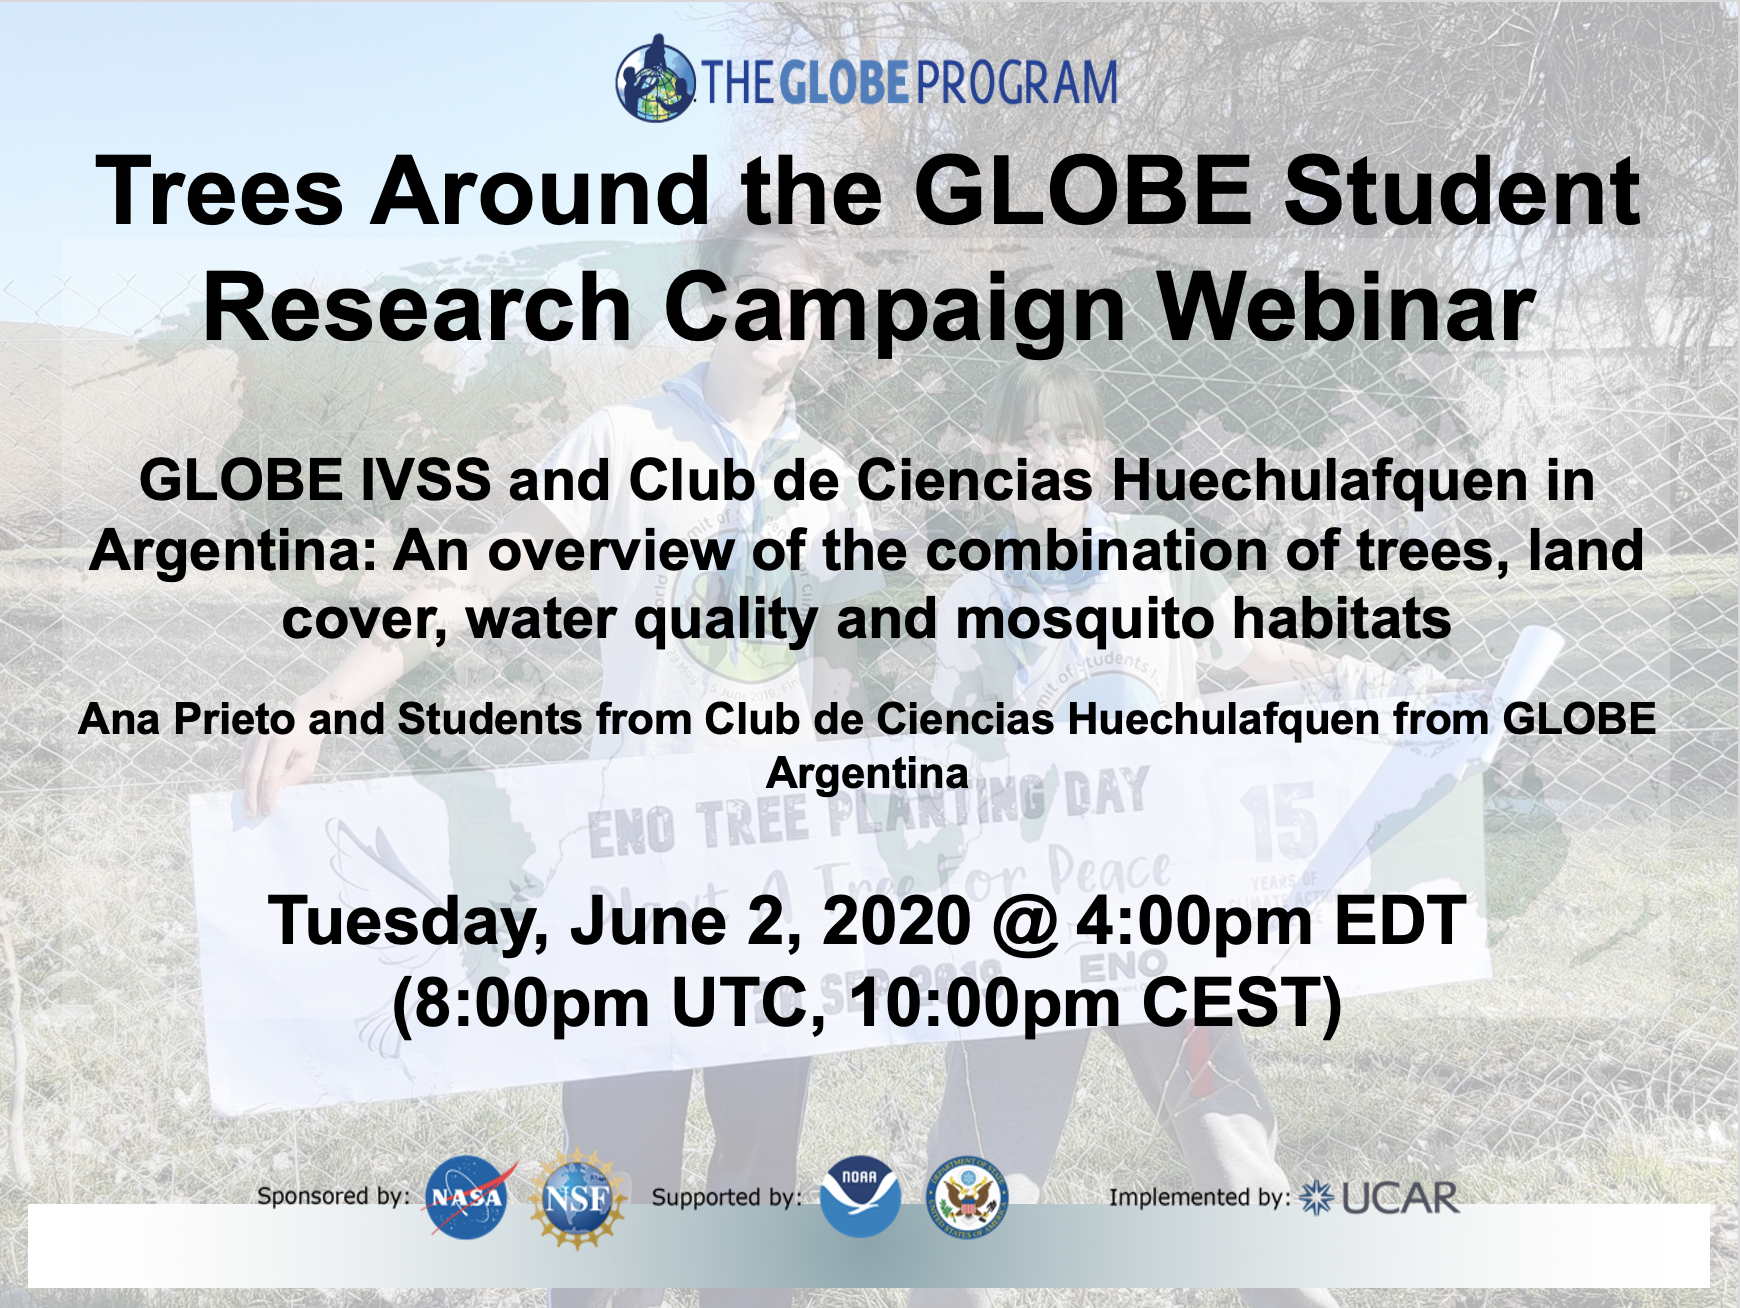 Trees Around the GLOBE Student Research Campaign webinar 02 June shareable